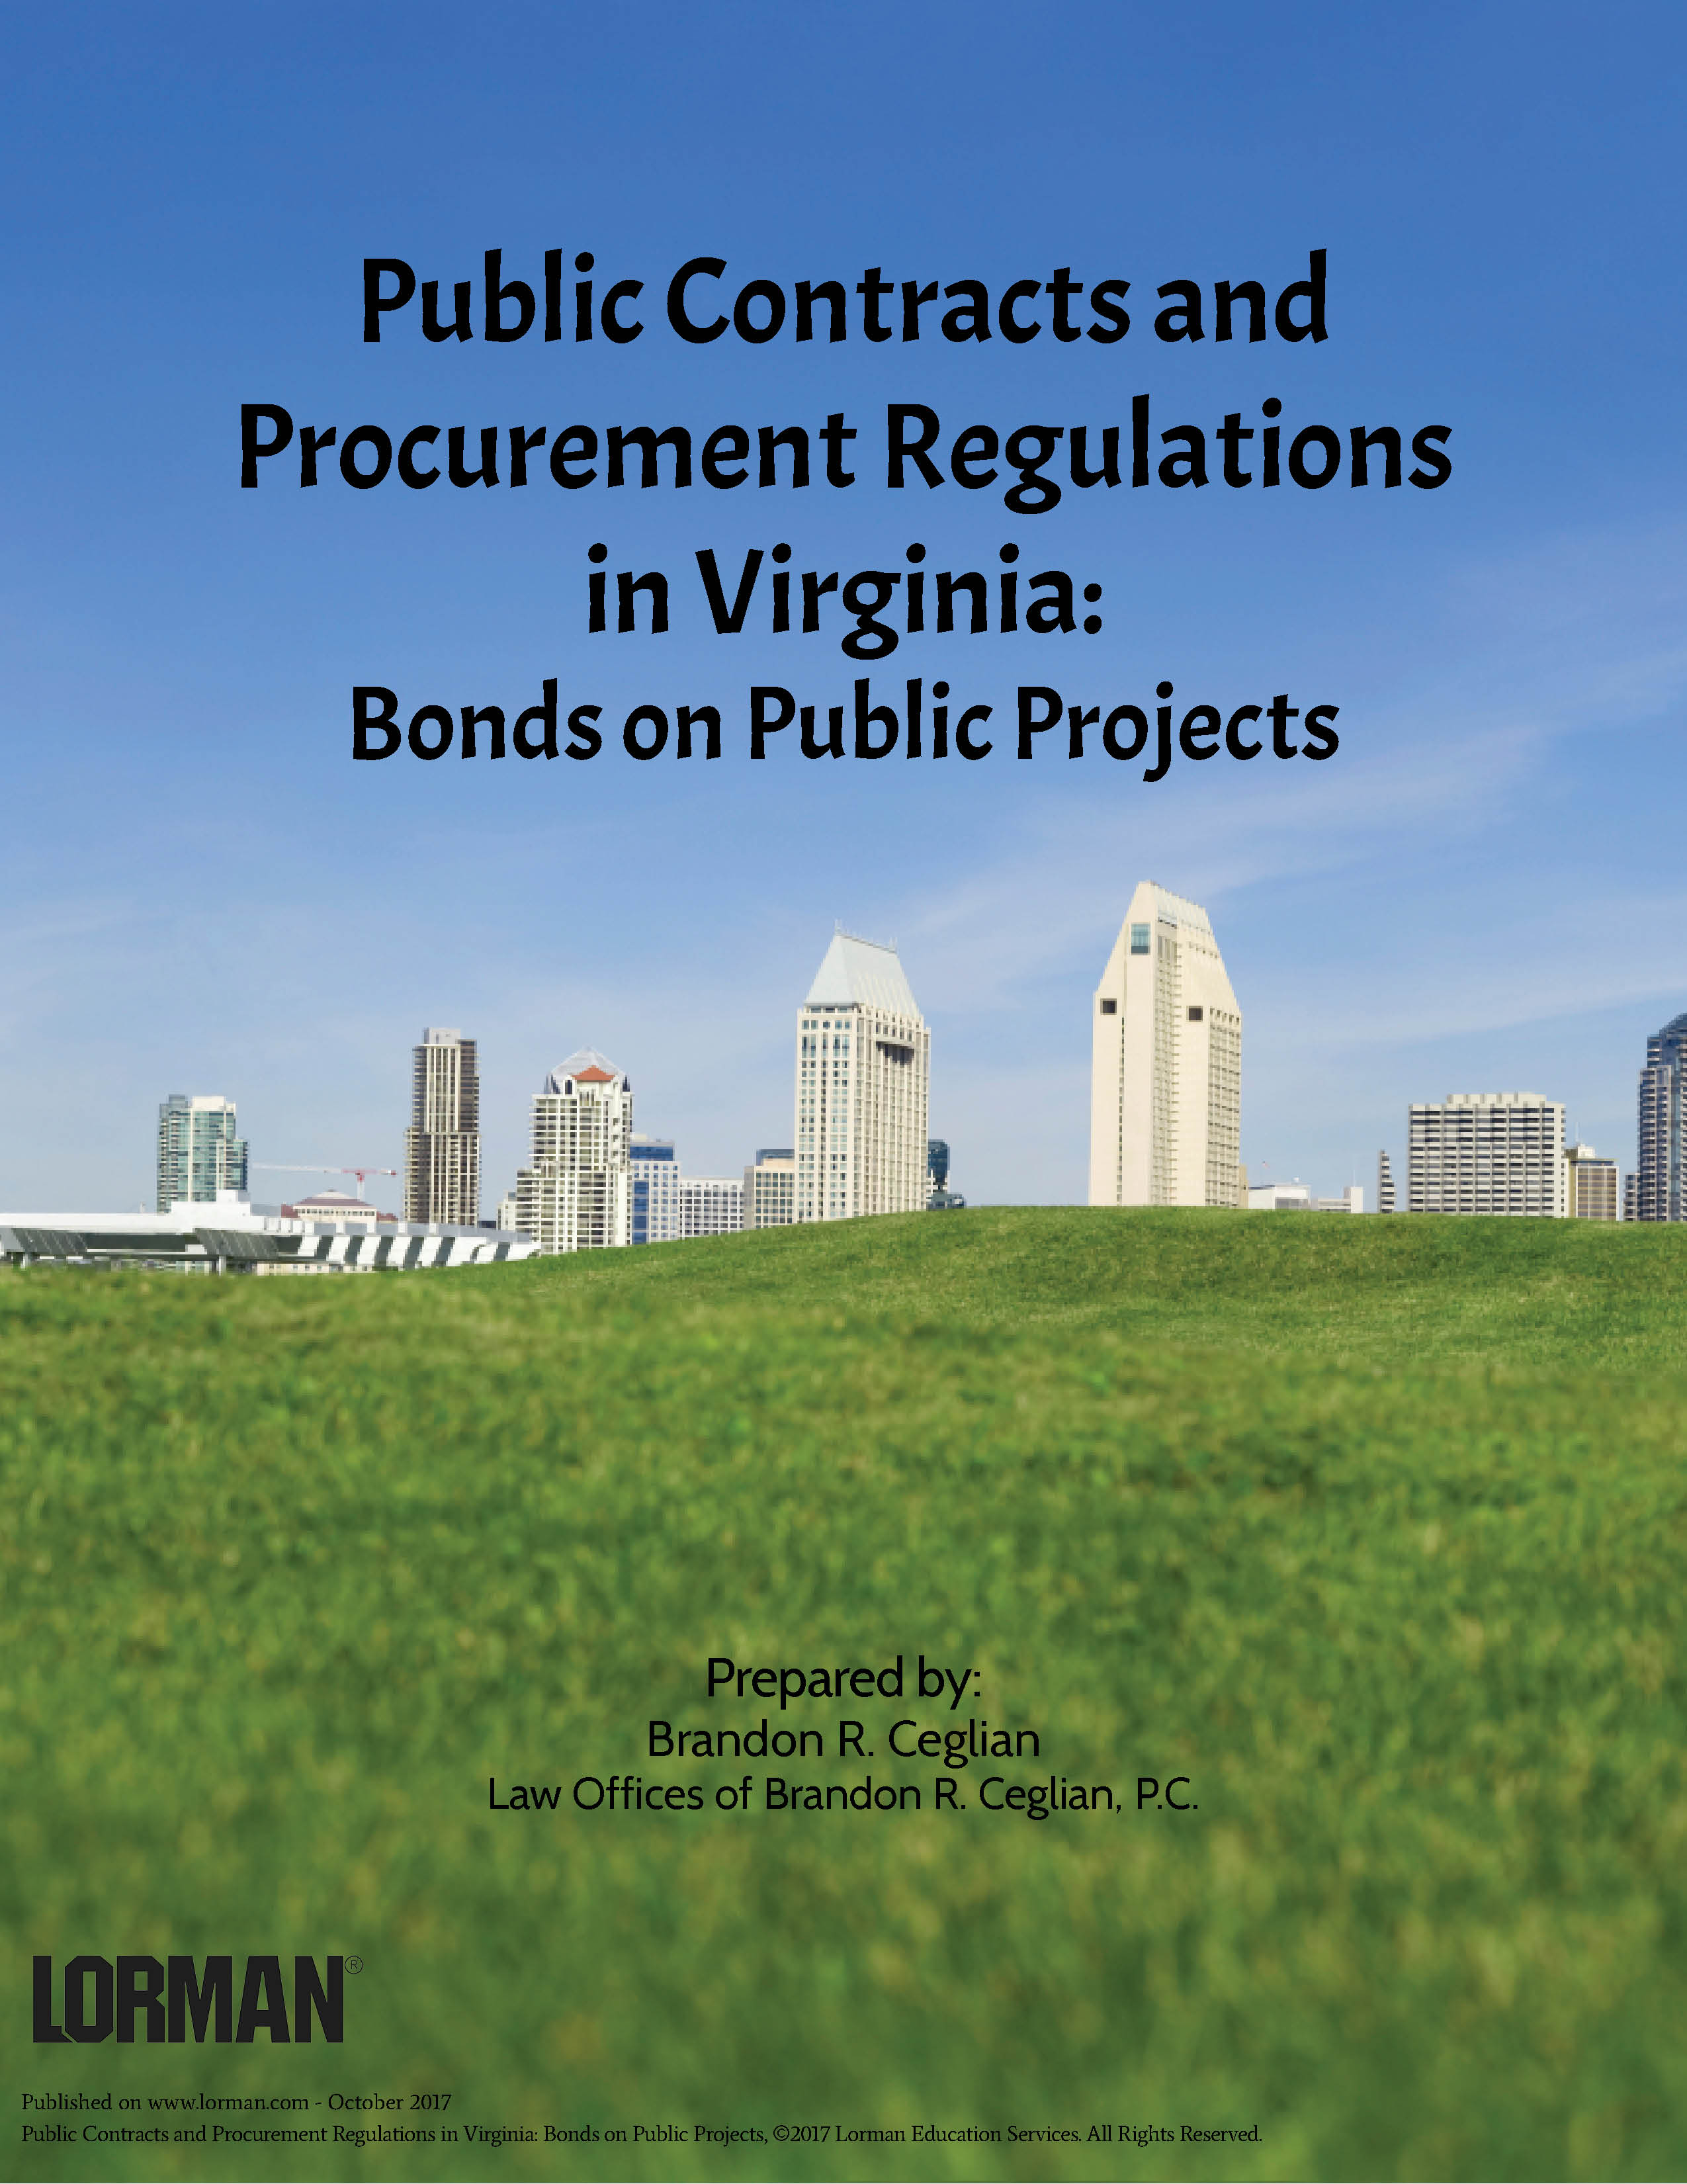 Public Contracts and Procurement Regulations in Virginia: Bonds on Public Projects